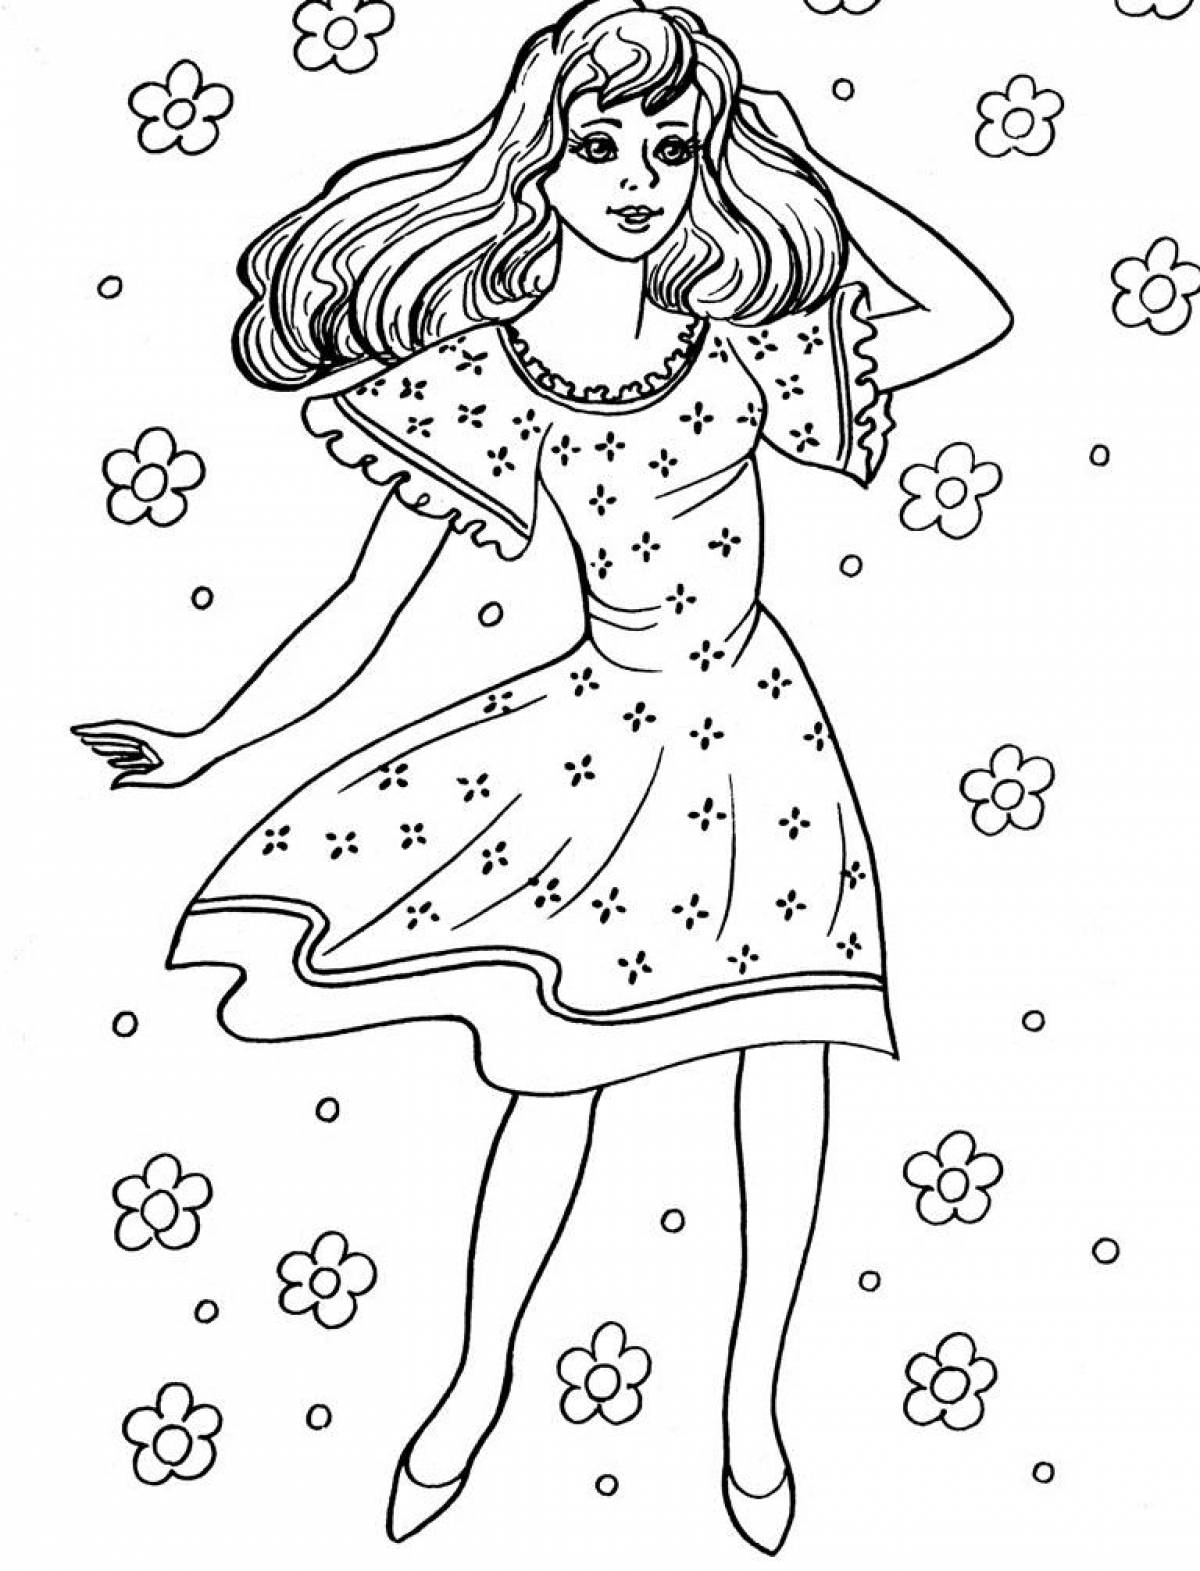 Fairytale coloring pages for girls for kids